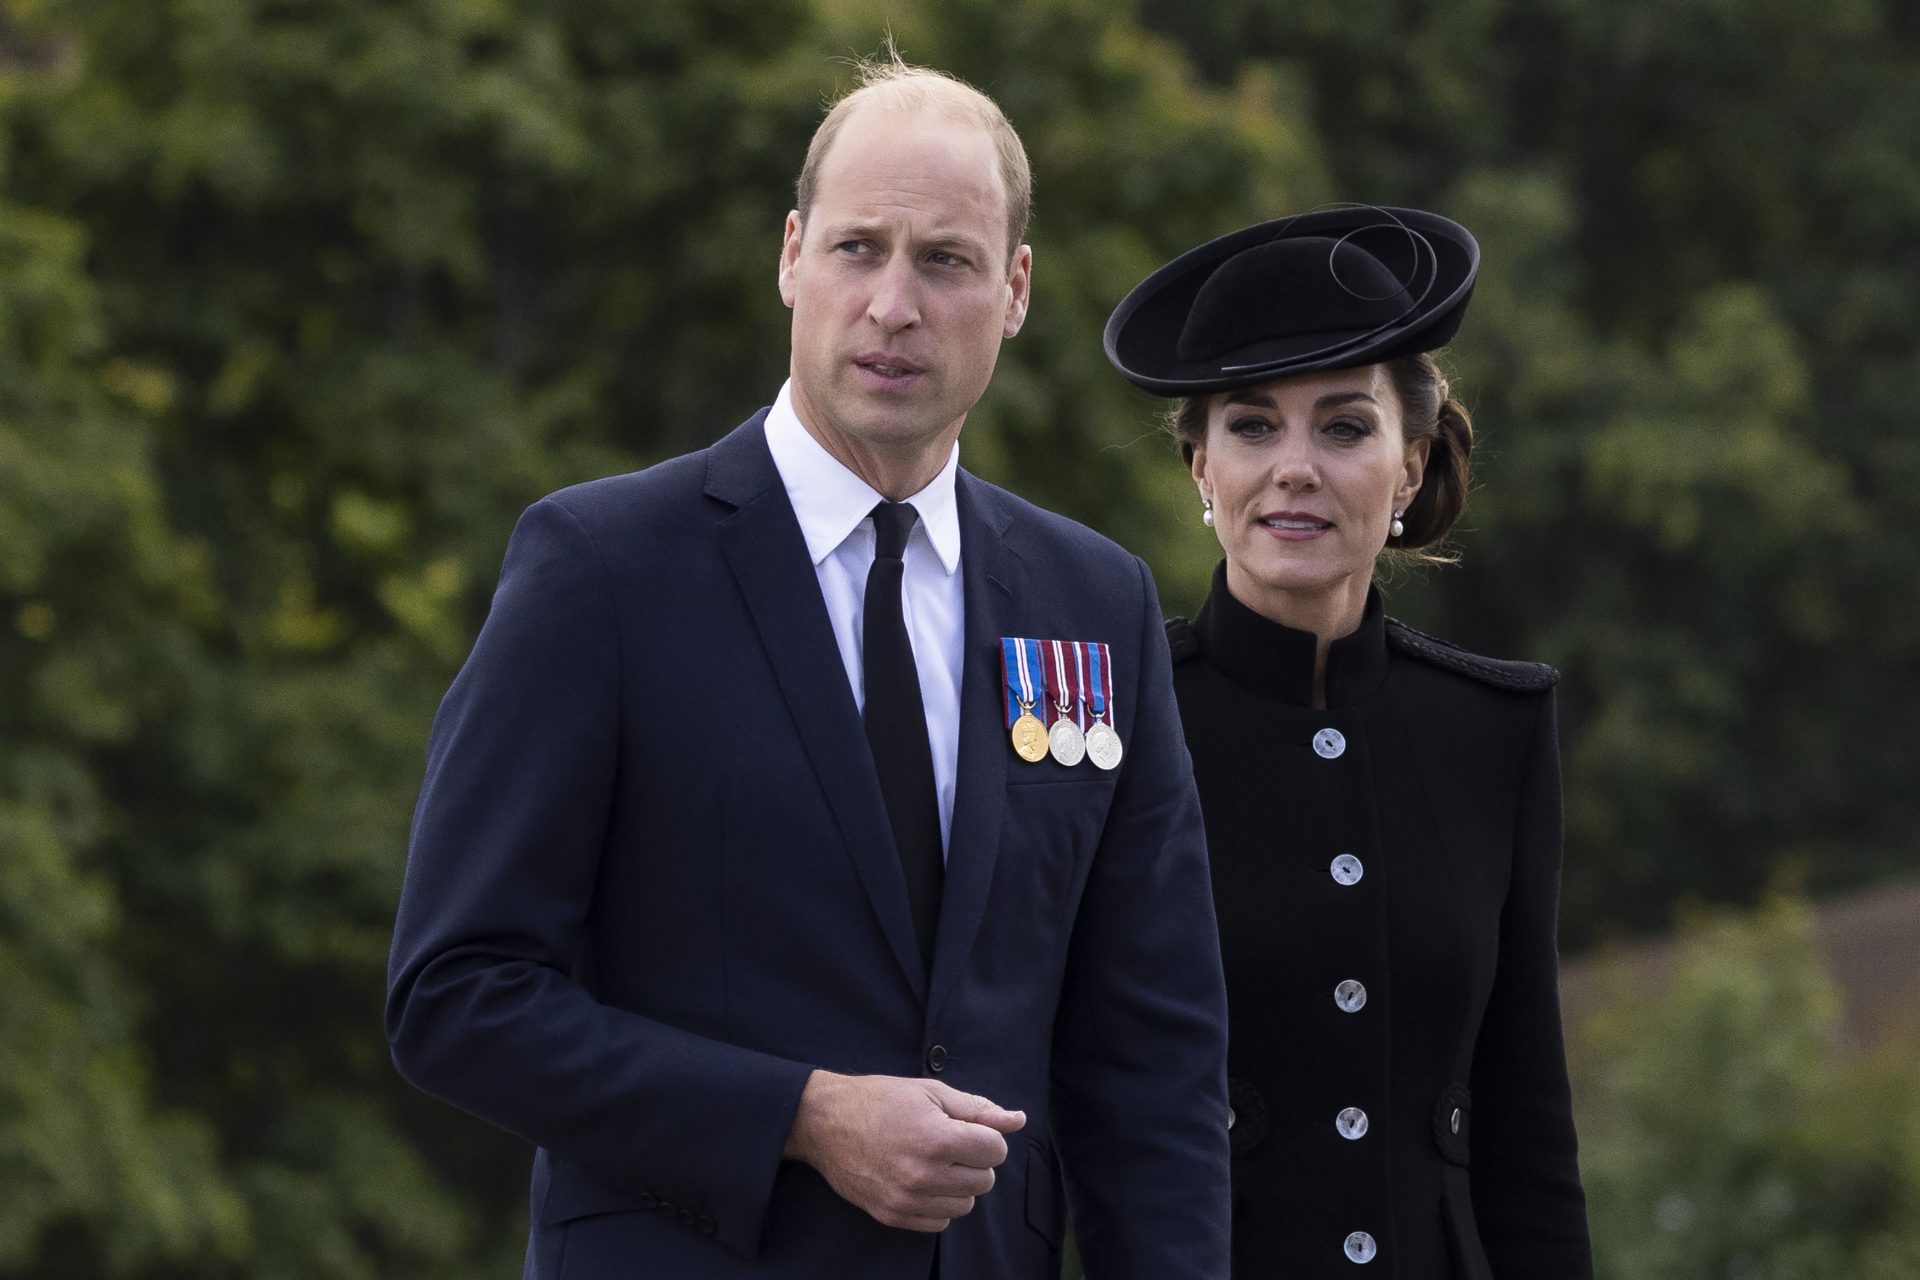 Where is Prince William? Where is Kate Middleton? The current turmoil inside the royal family